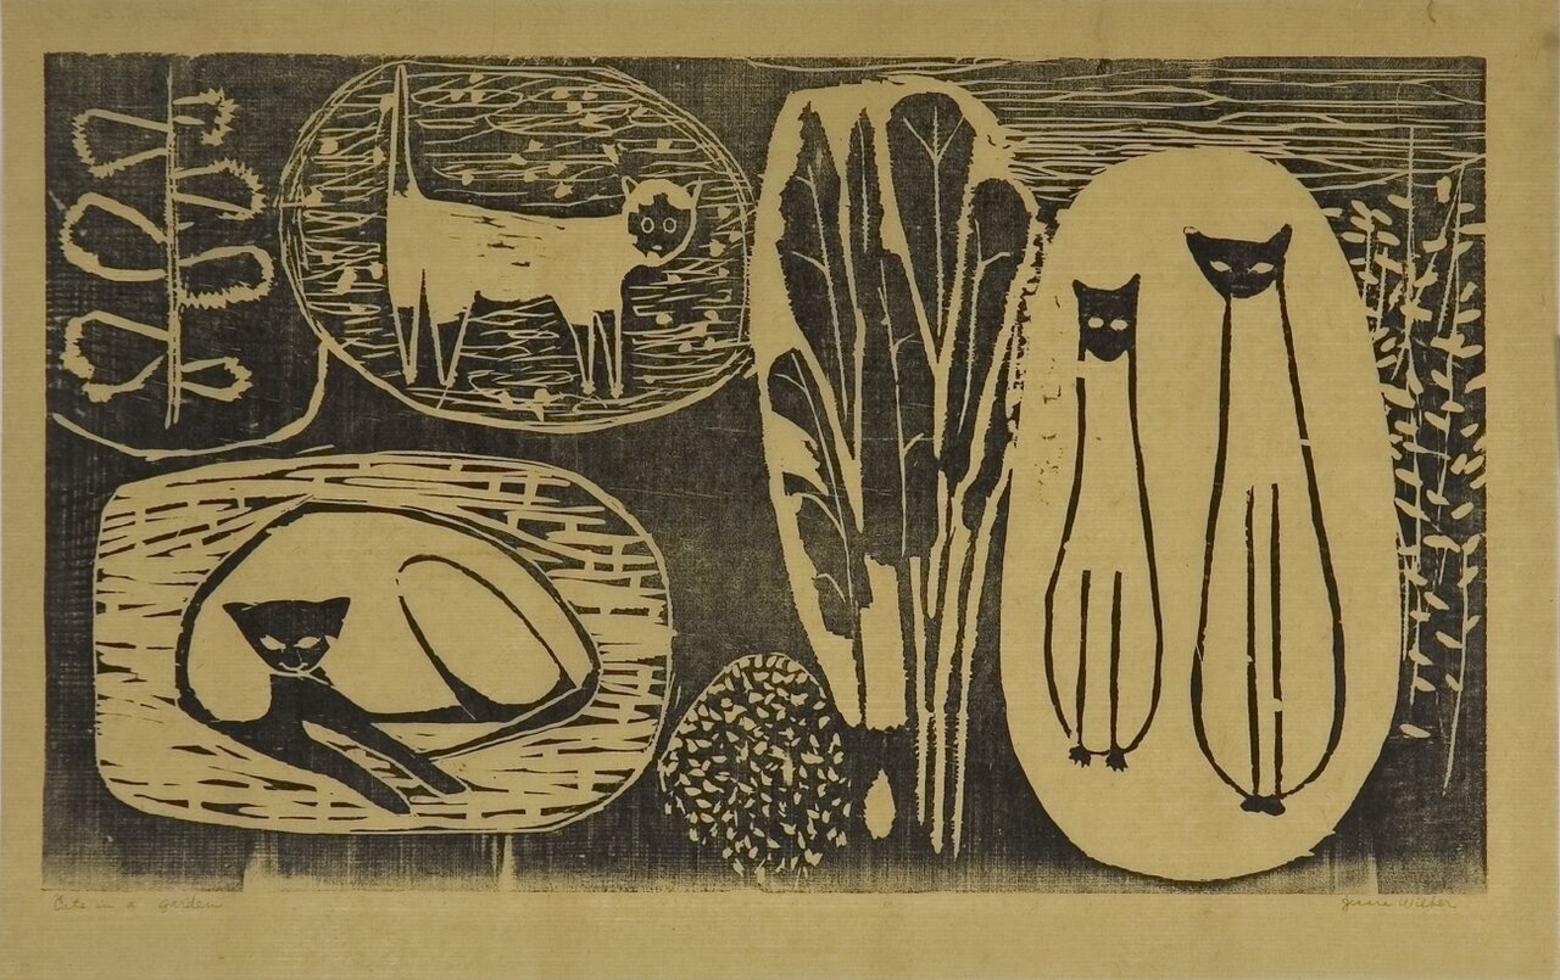 Top: "The River (Don't Dam It) (1977)  woodblock print byJessie Wilbur. Above: "Cats in Garden" (1950), also by Wilber. Images courtesy Montana State University School of Art